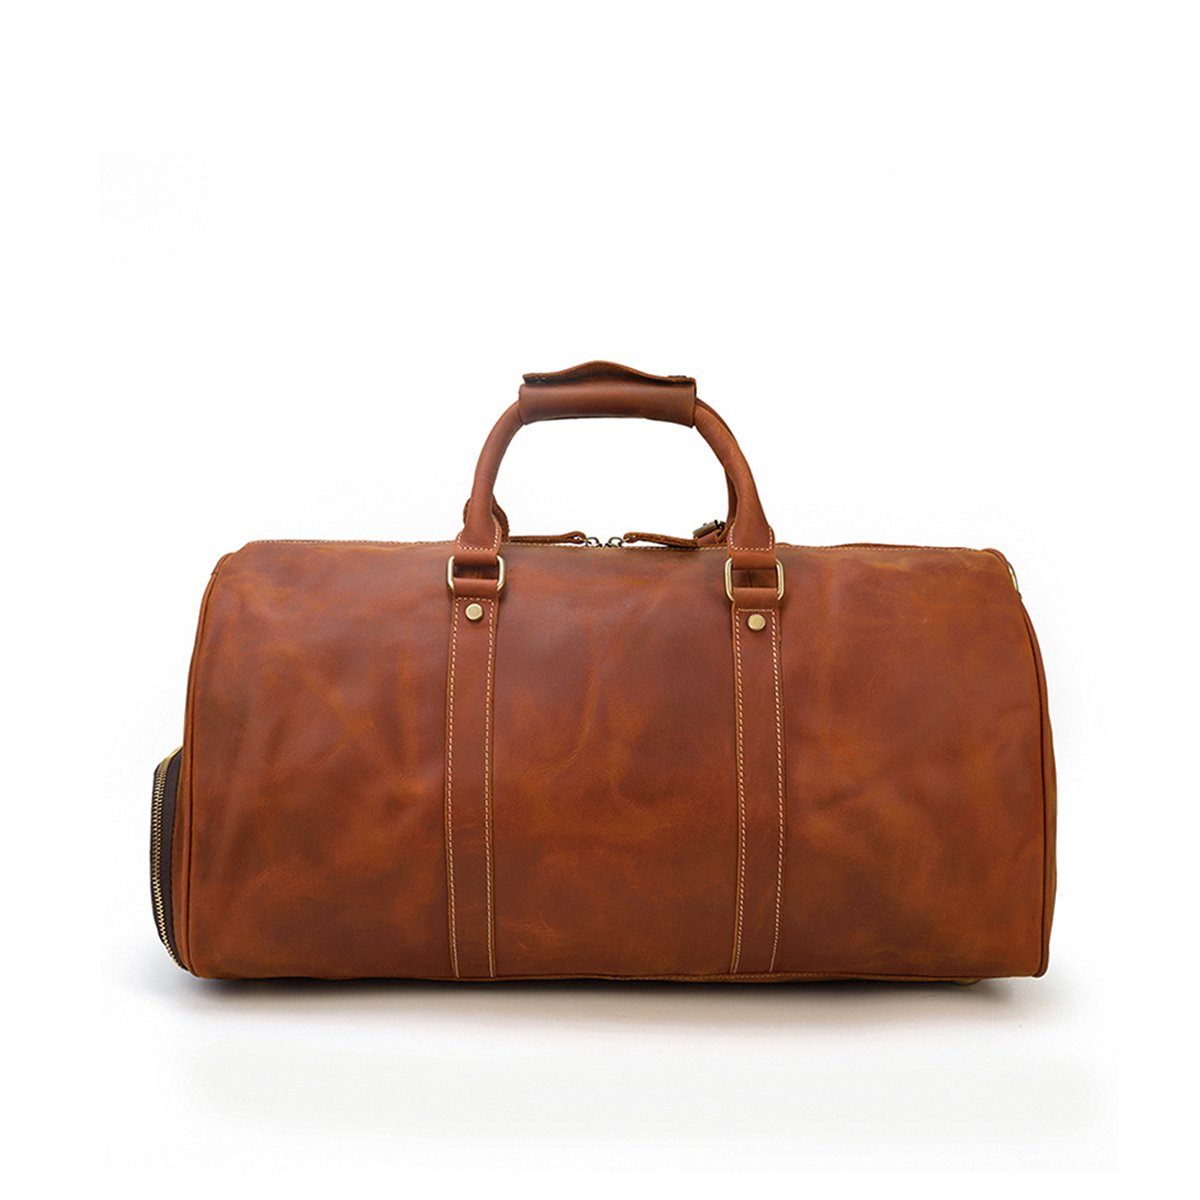 grey Brown Leather Duffle Bag